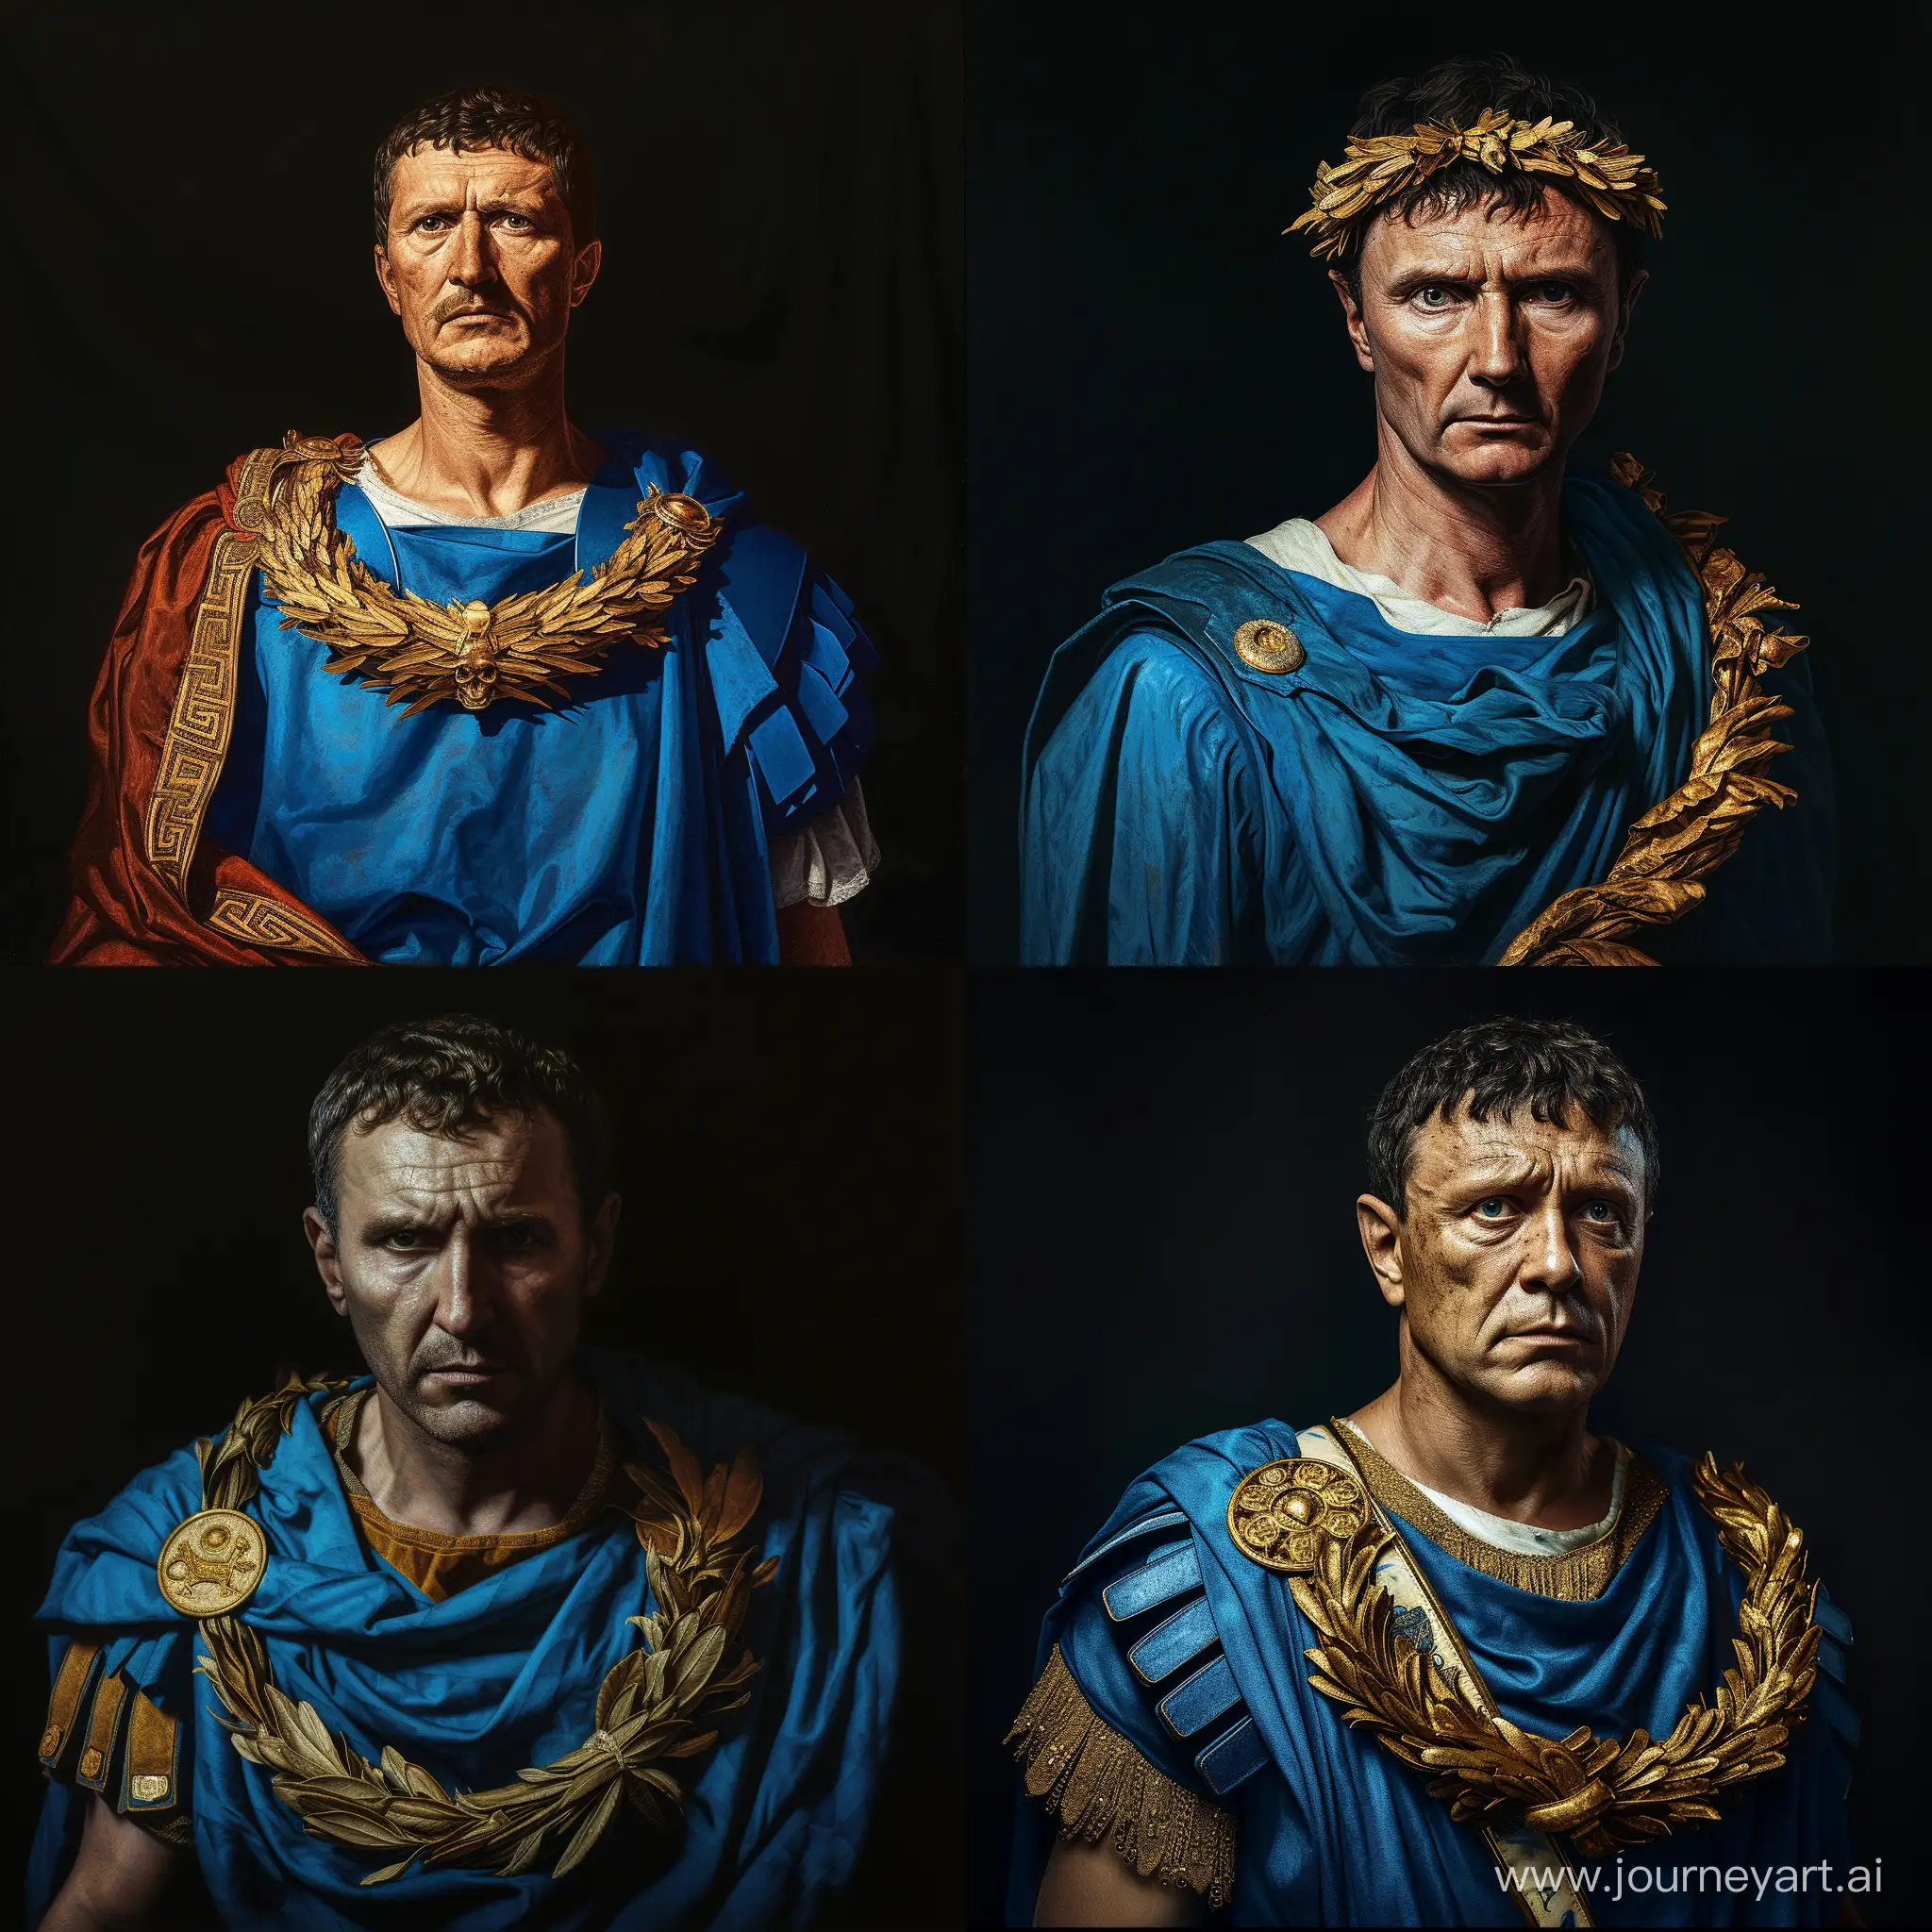 Powerful-Roman-Dictator-Portrait-Tyrant-in-Blue-Tunic-and-Golden-Wreath